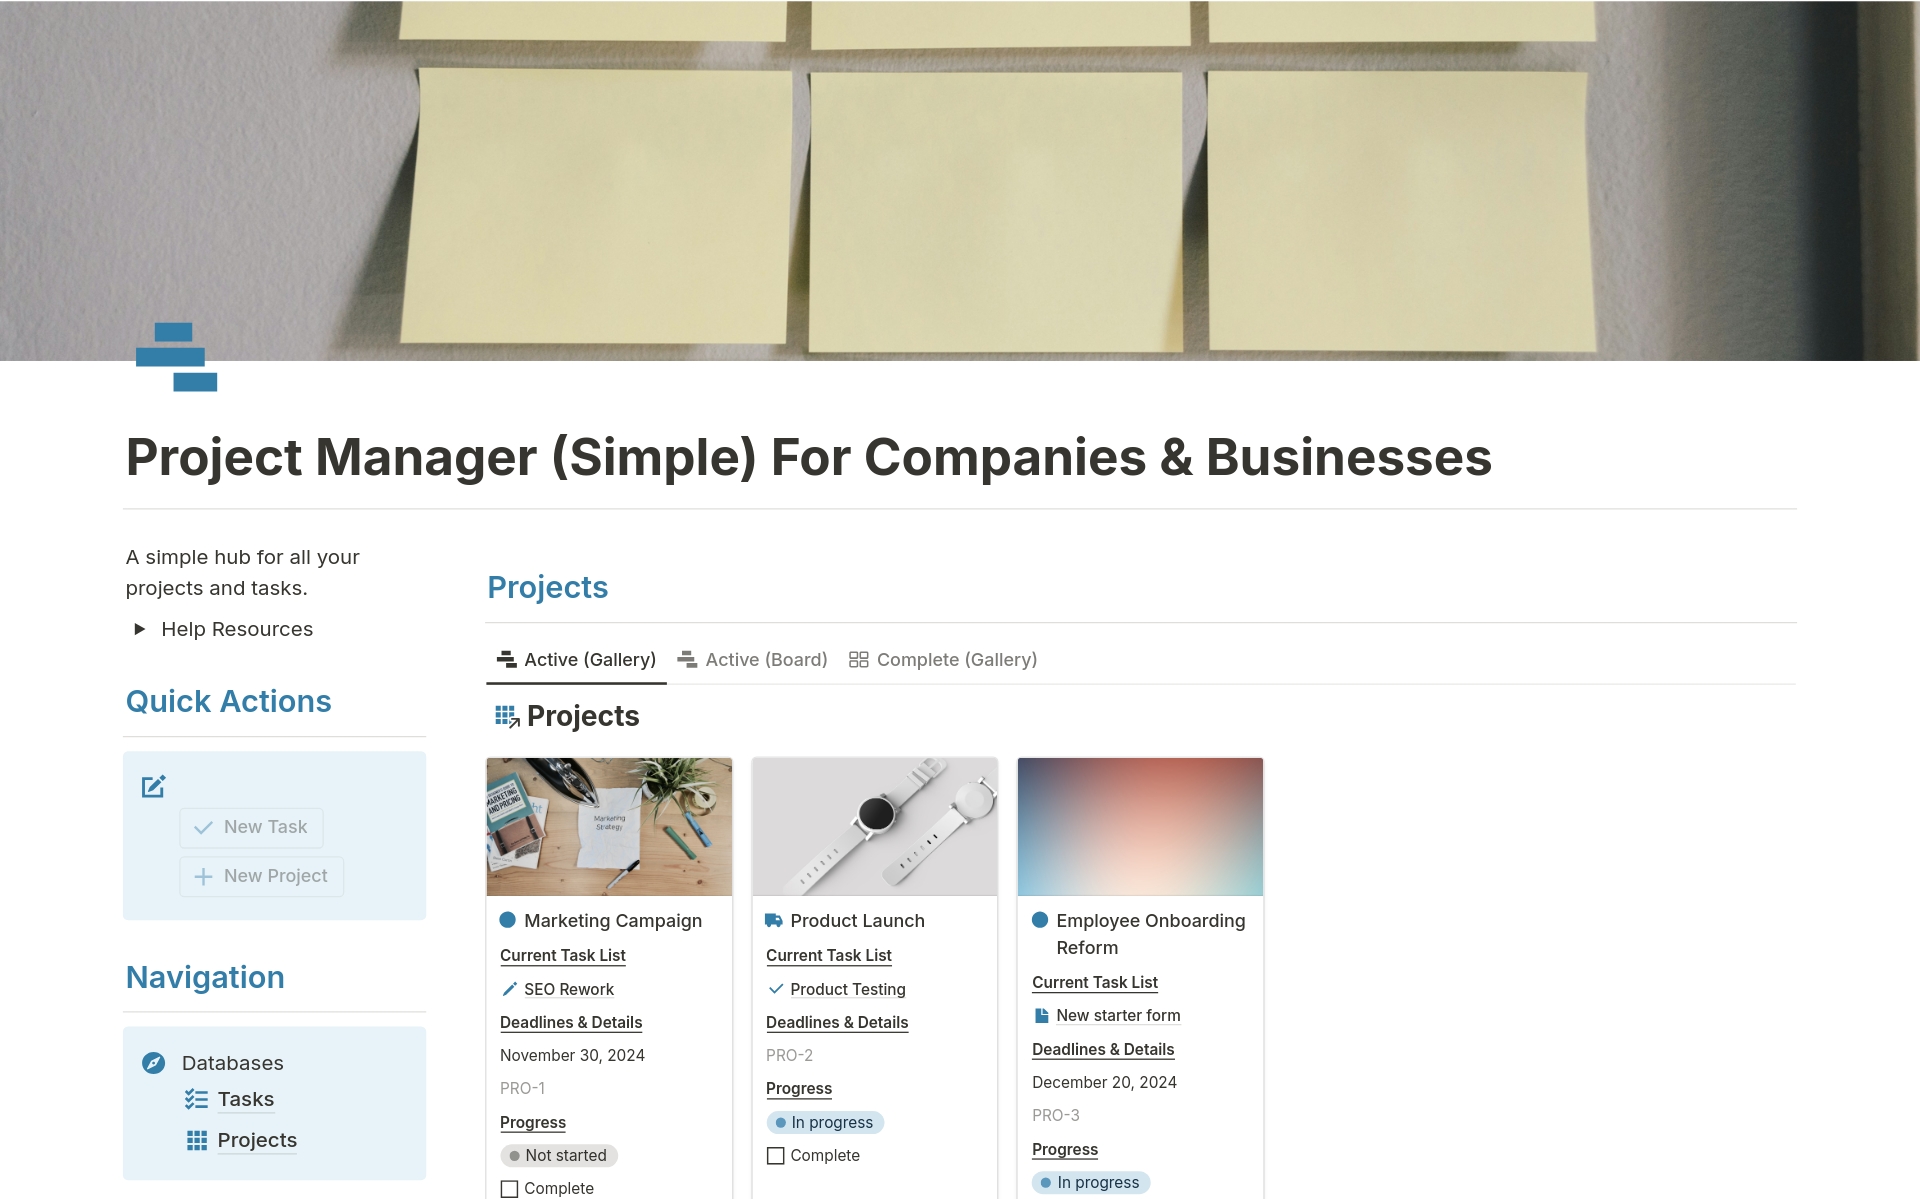 Project Manager For Companies & Business (Simple)님의 템플릿 미리보기